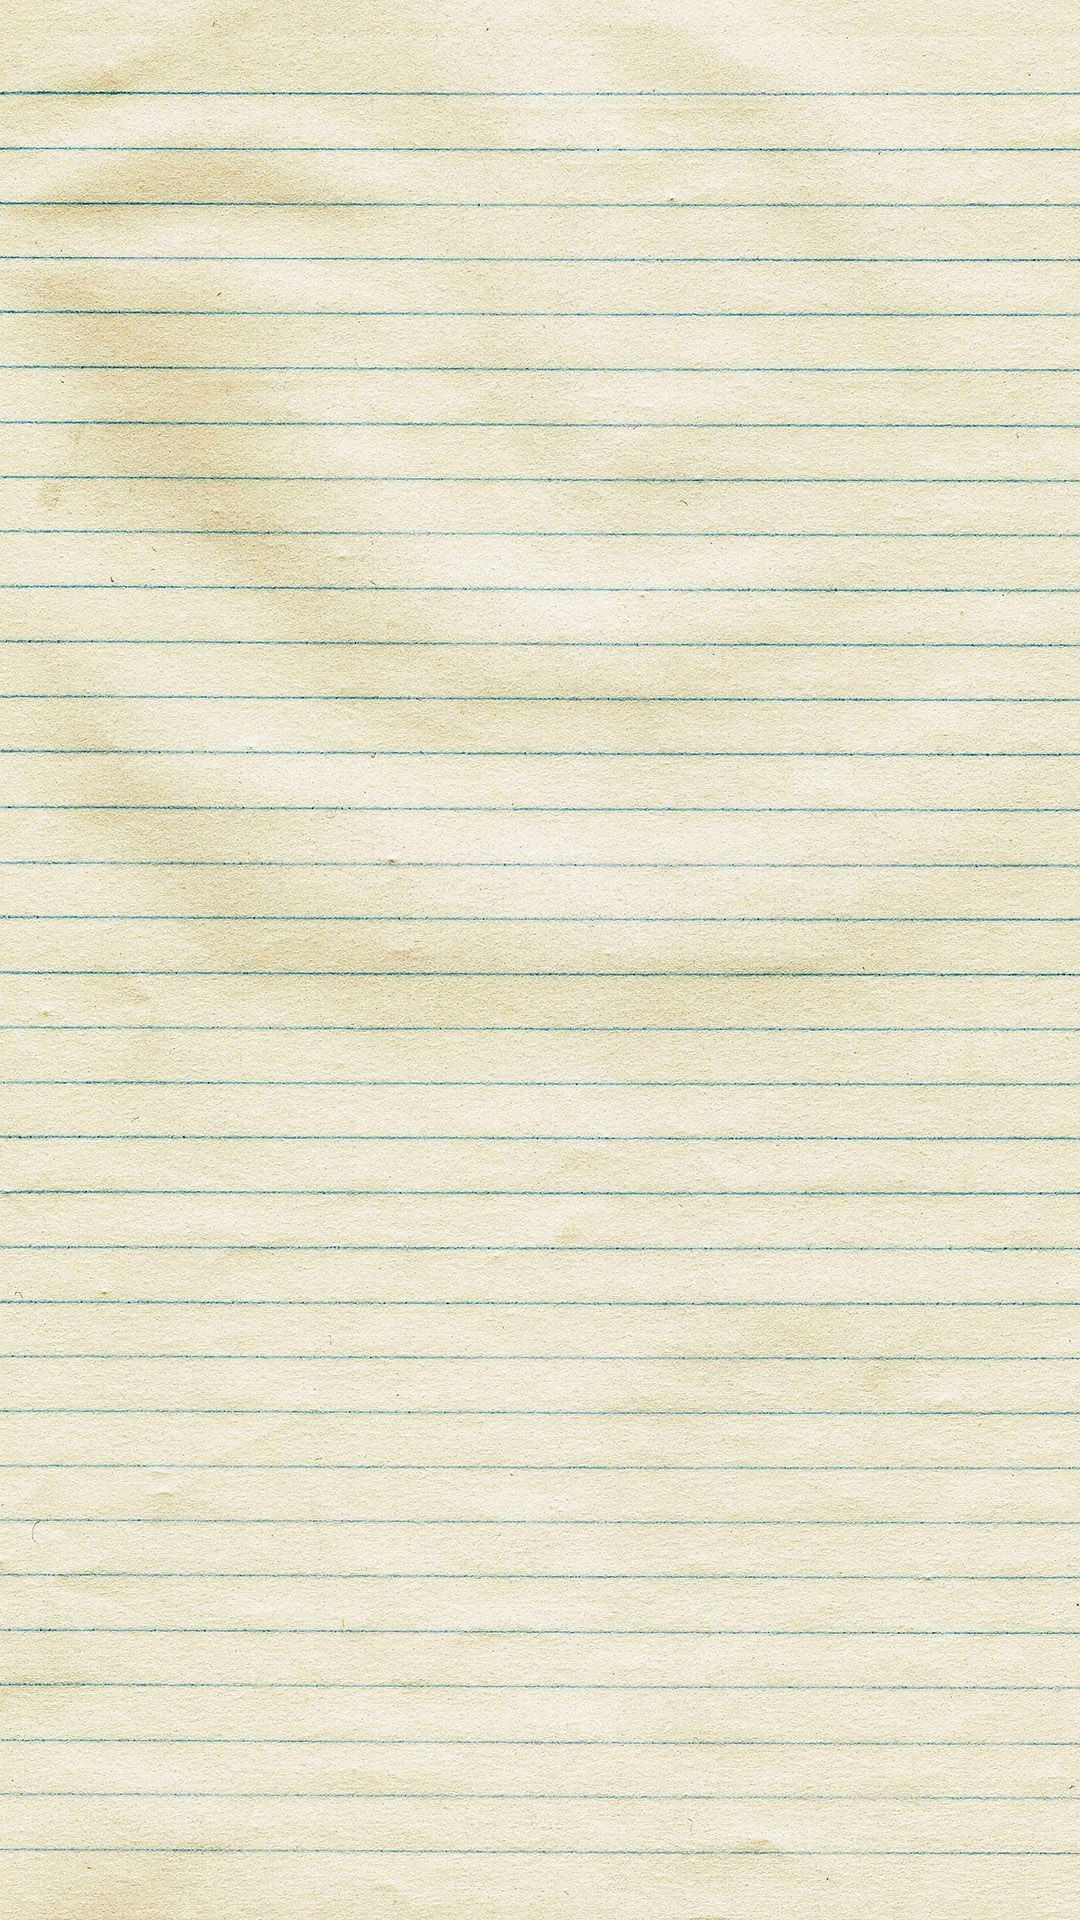 1080x1920 Notebook paper. Collection of Texture Backgrounds for iPhone - @mobile9  #texture #materials